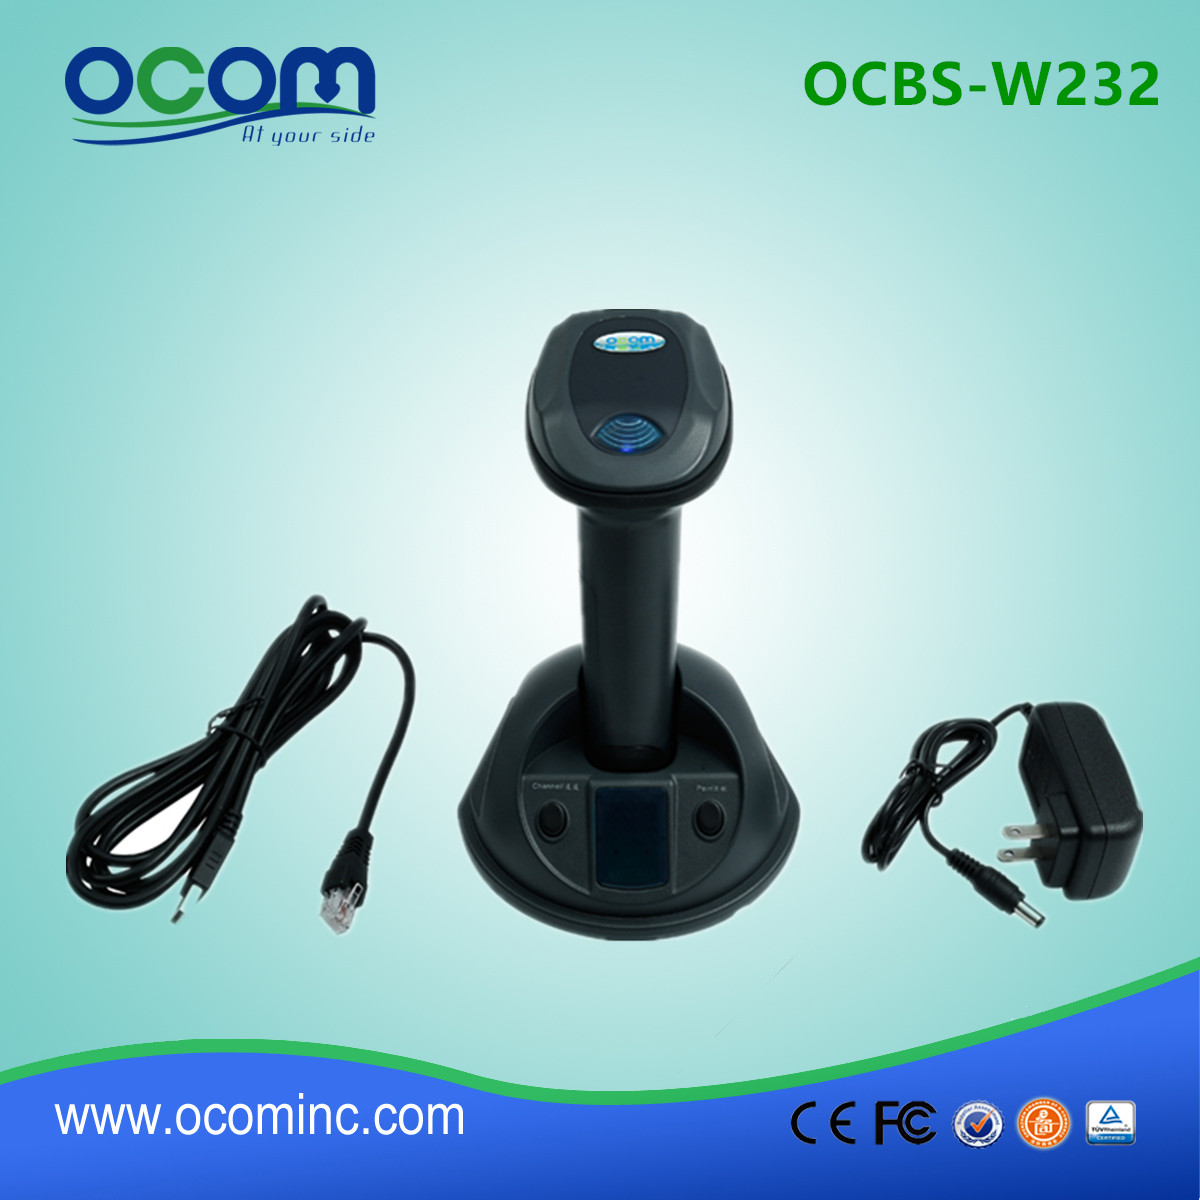 (OCBS-W232) Wireless 2D Barcode Scanner with Bluetooth and 433MHz function